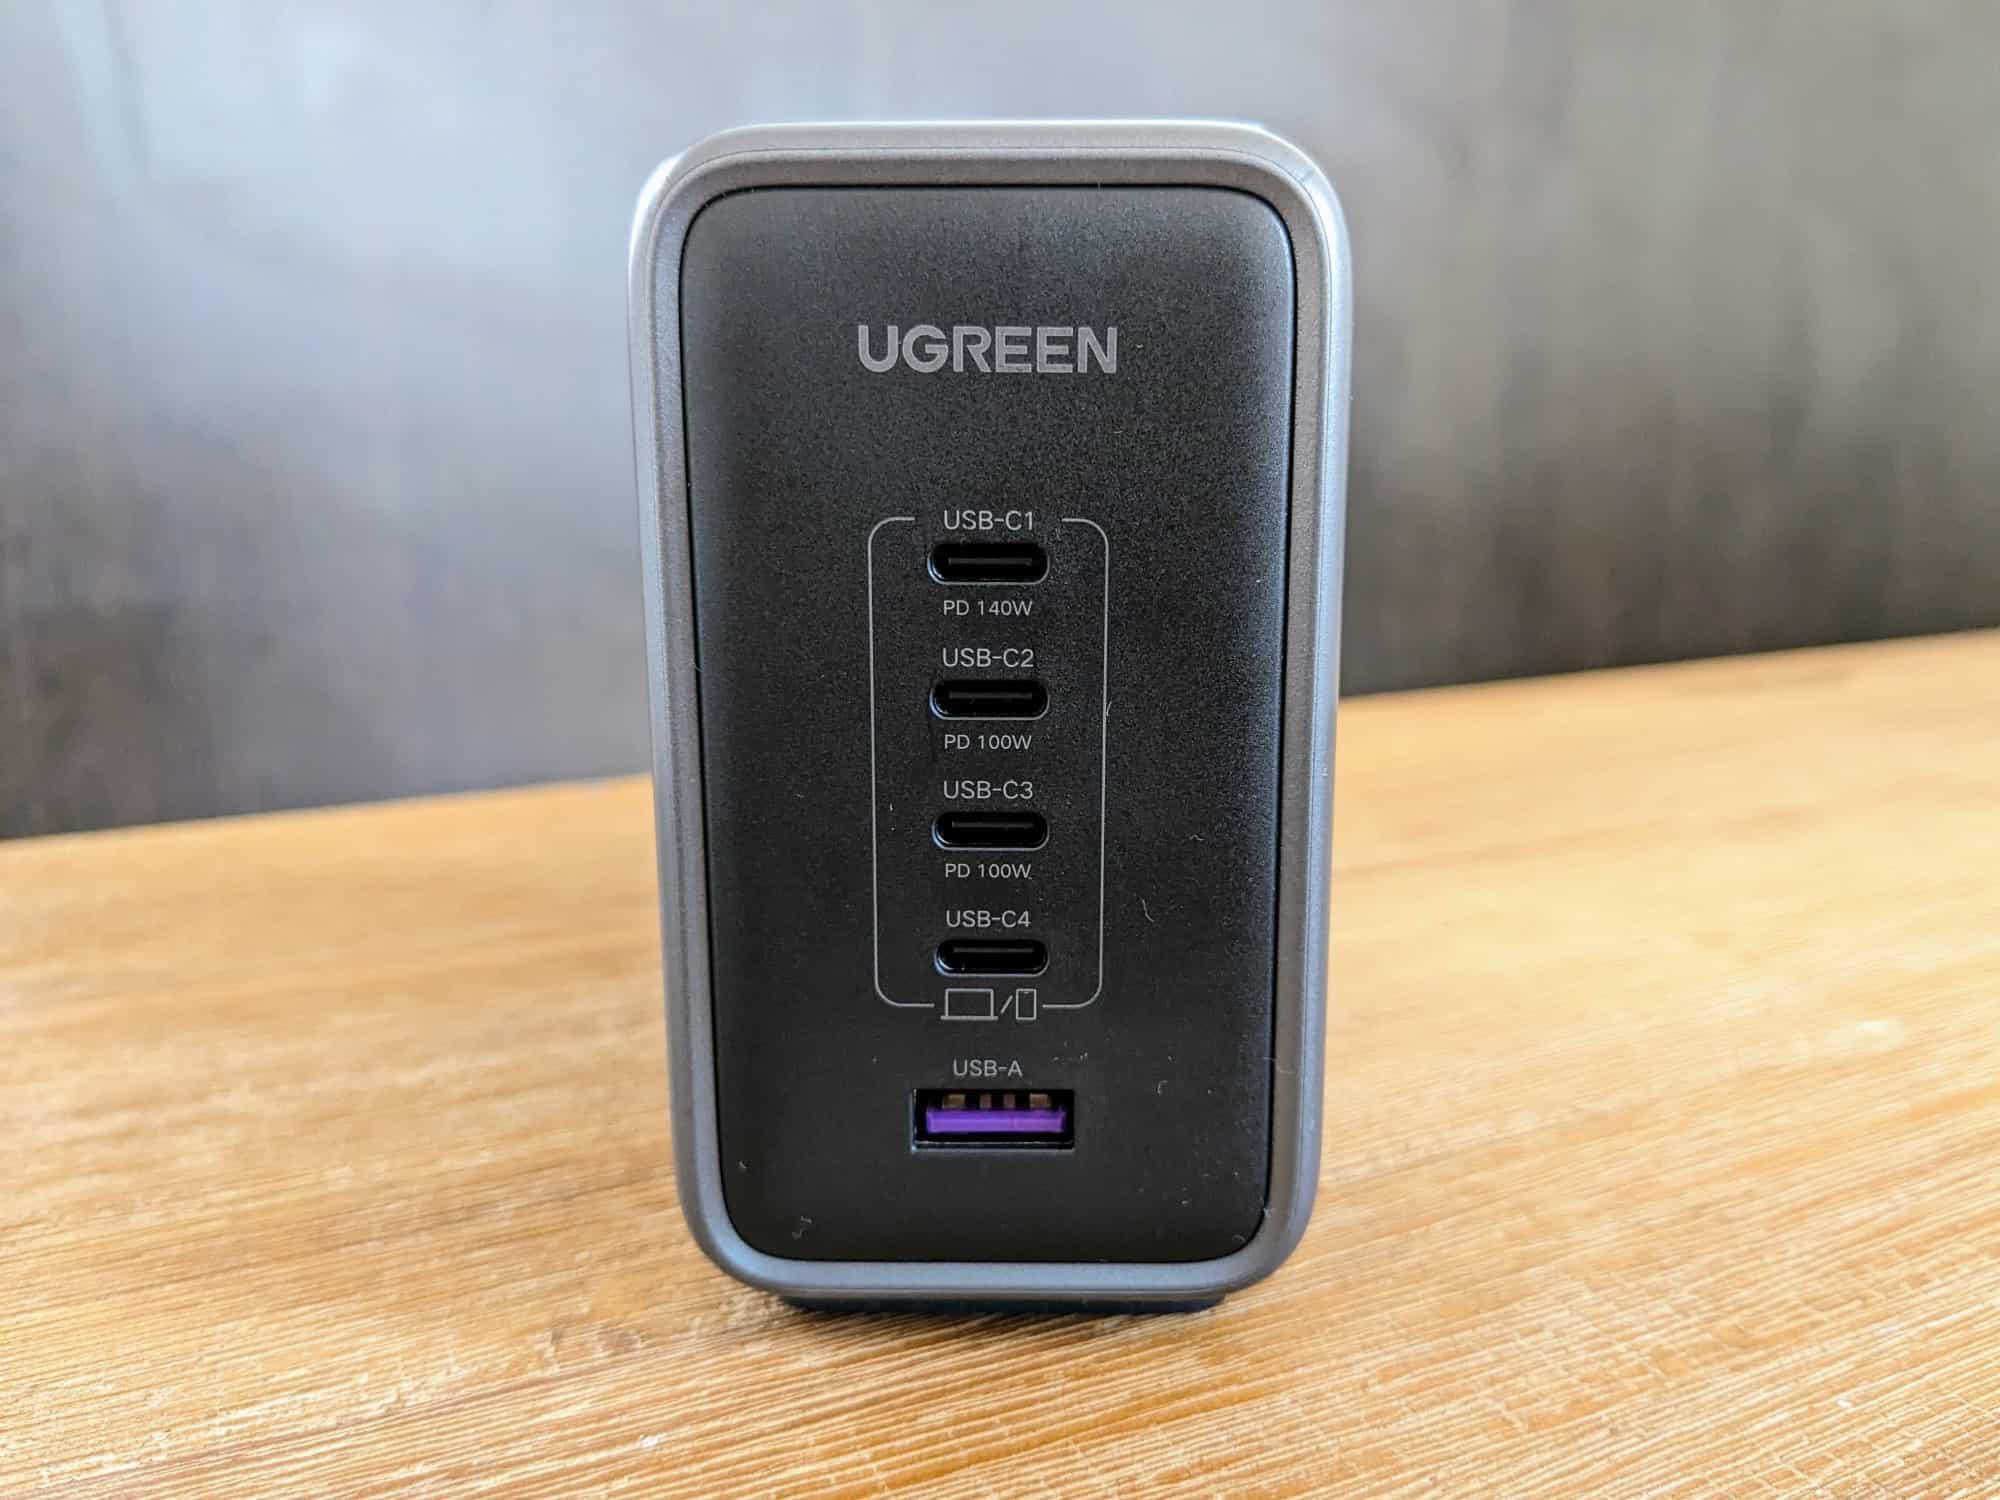 Ugreen 300W desktop charger sitting on wooden table, with darker wood counter behind. Front of charger visible with five USB ports and Ugreen branding at top.